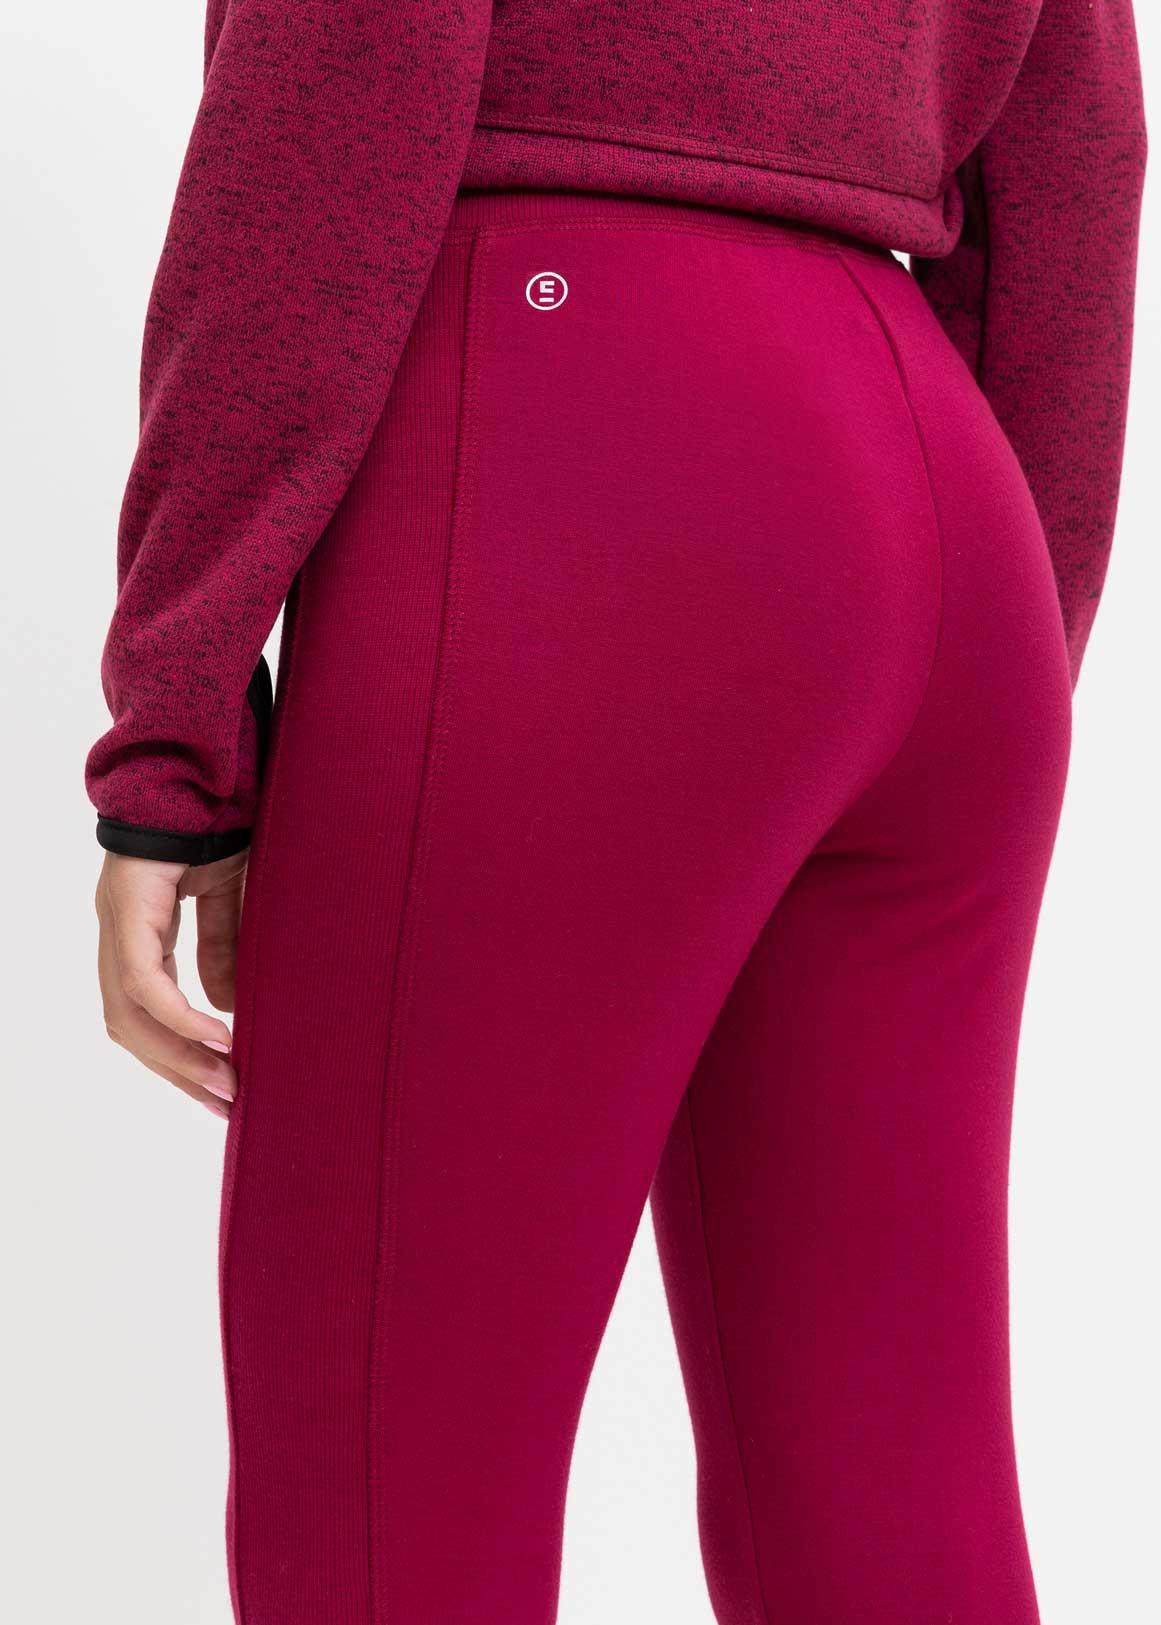 Viscose Plain Ladies Ruby Legging, Size: S-XL at best price in